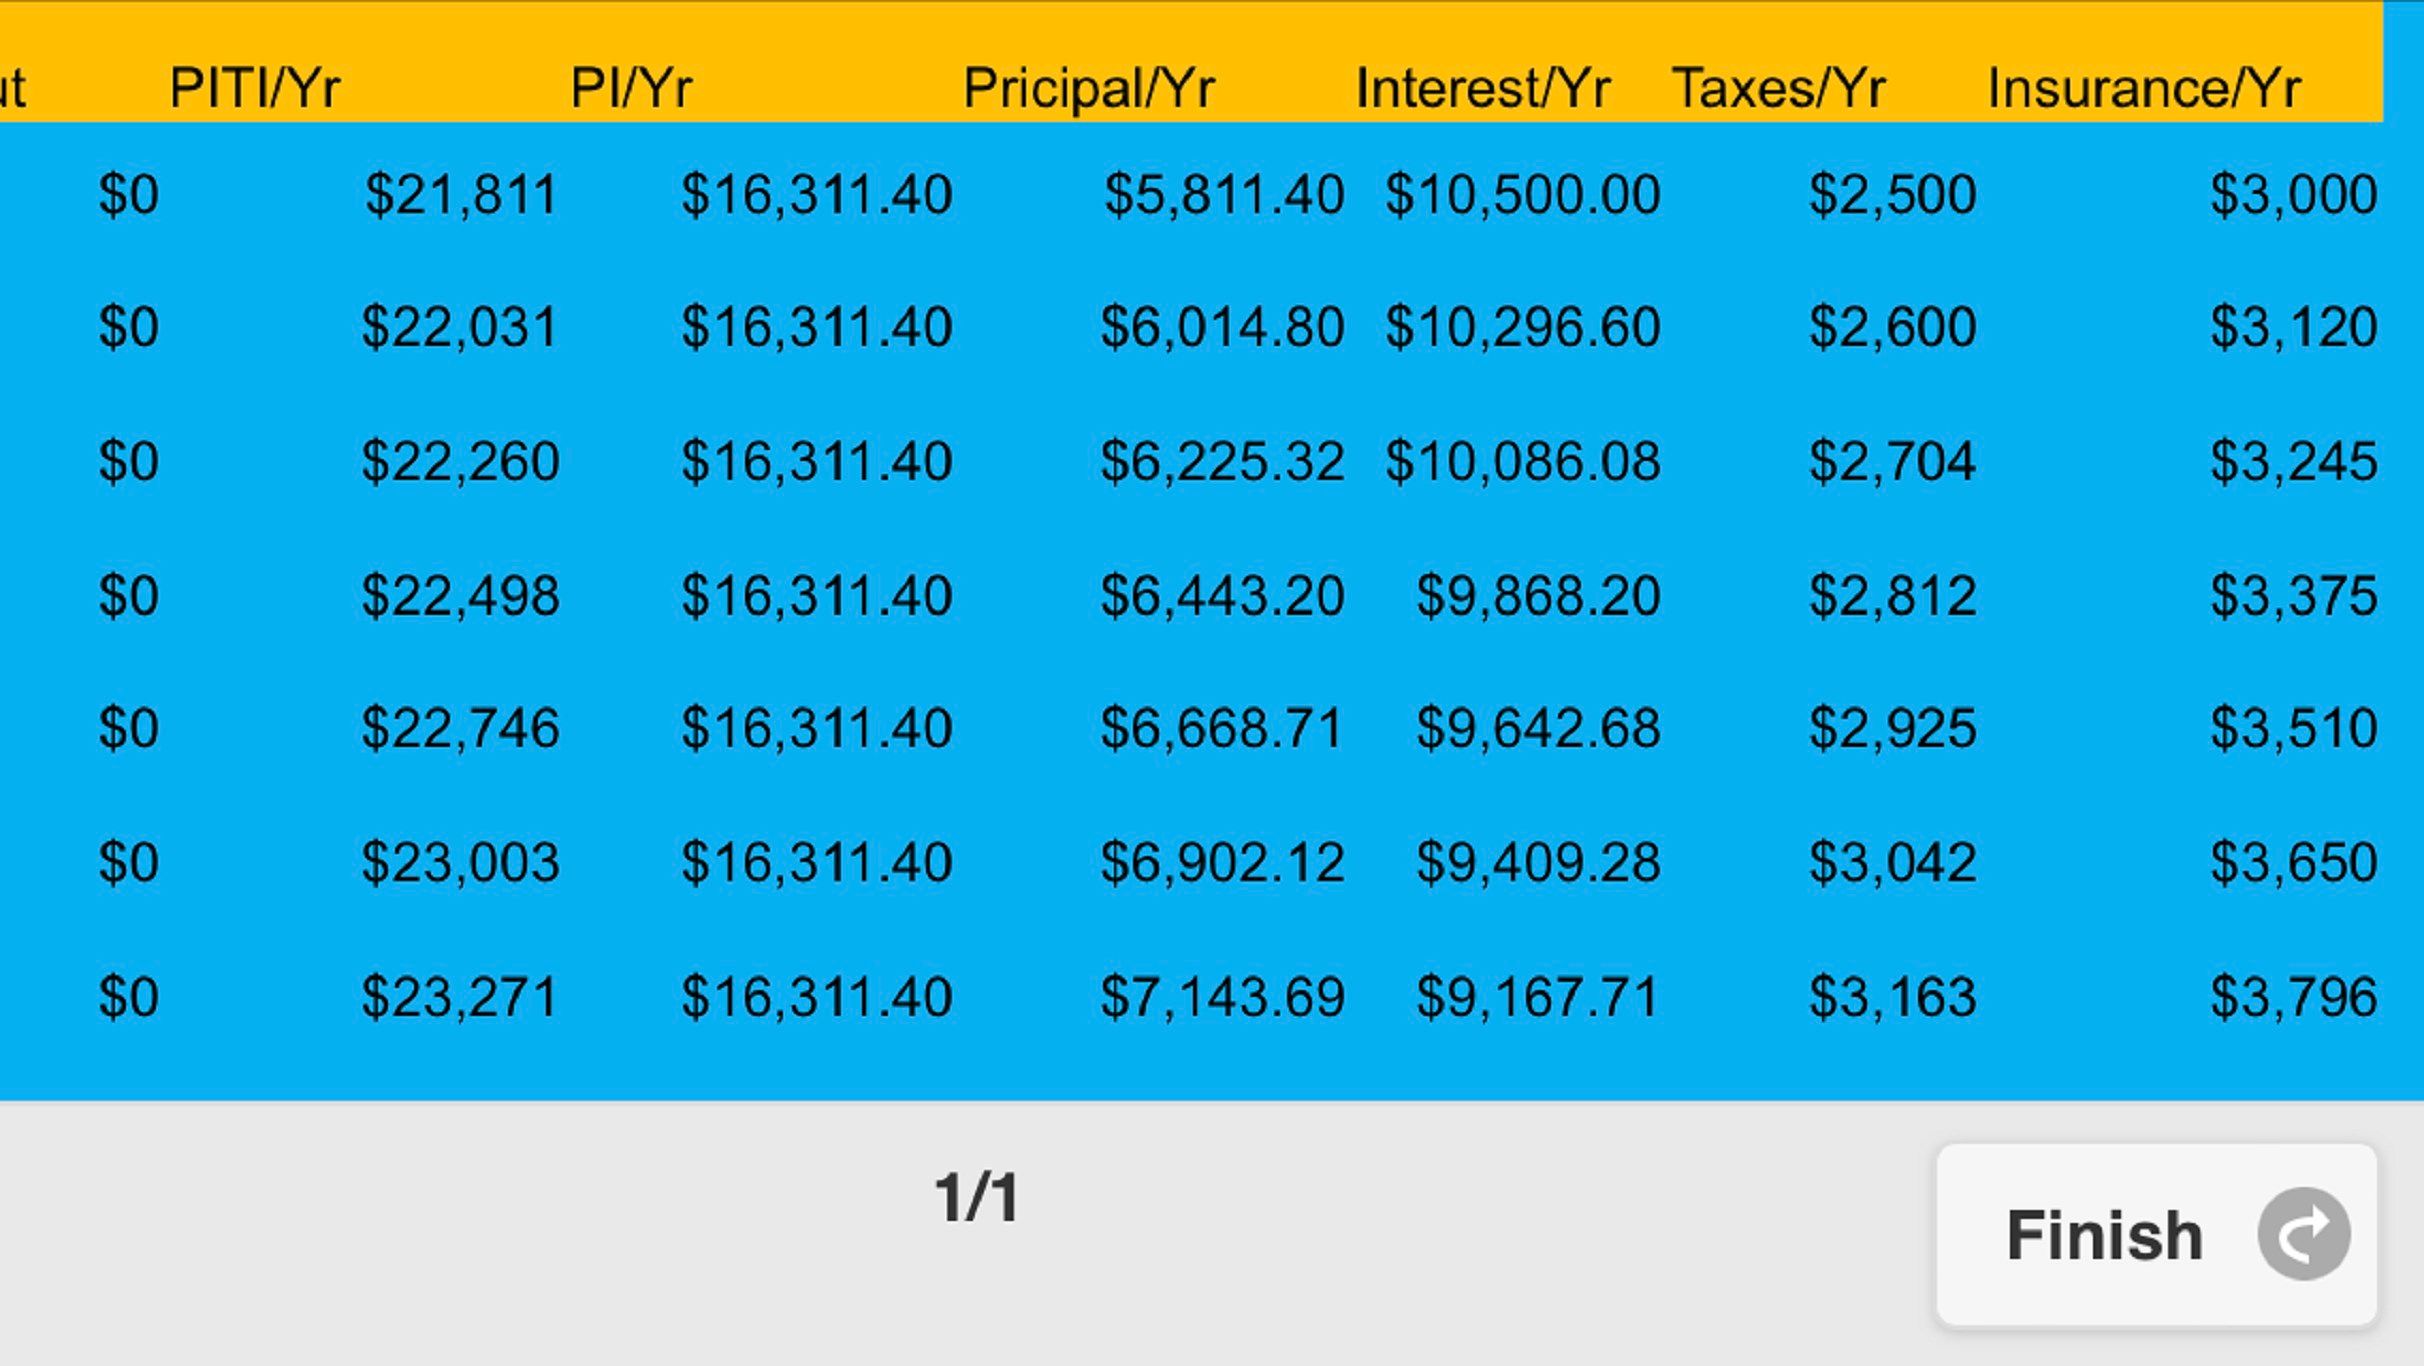 Amortization table of components of PITI payments per year.